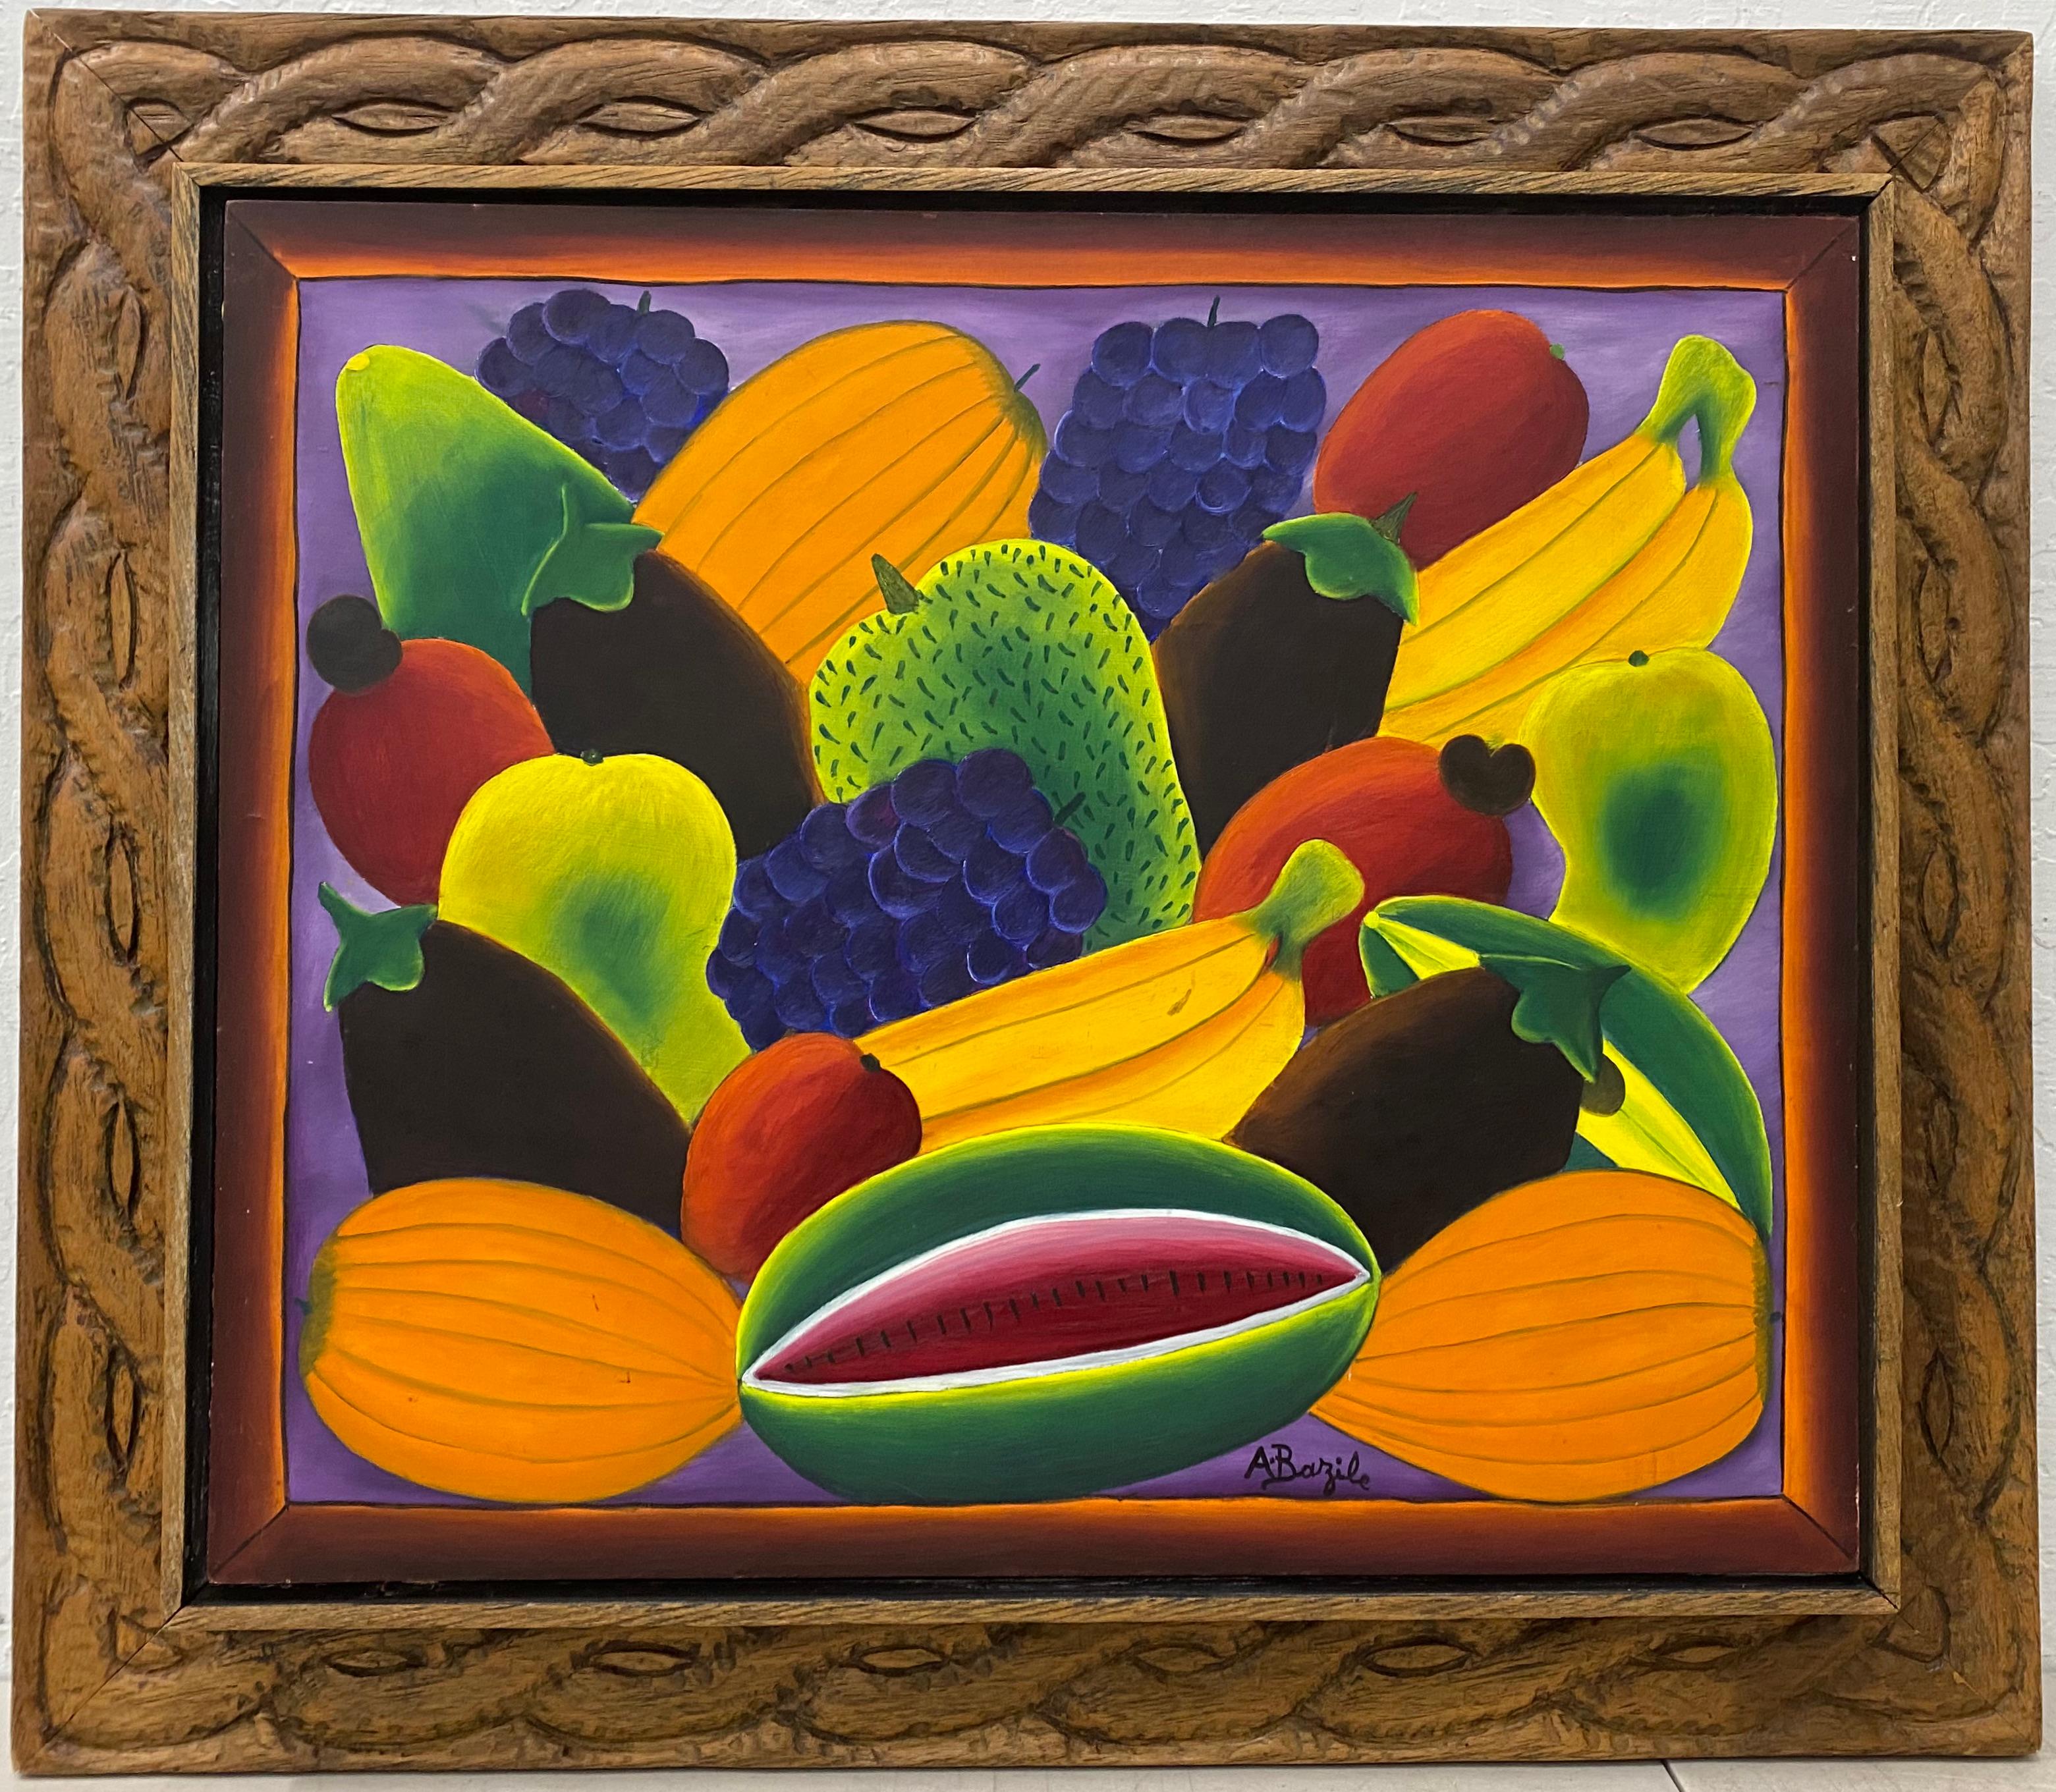 Alberoi Bazile "Fruit" Still Life Painting in Hand Carved Frame C.1970